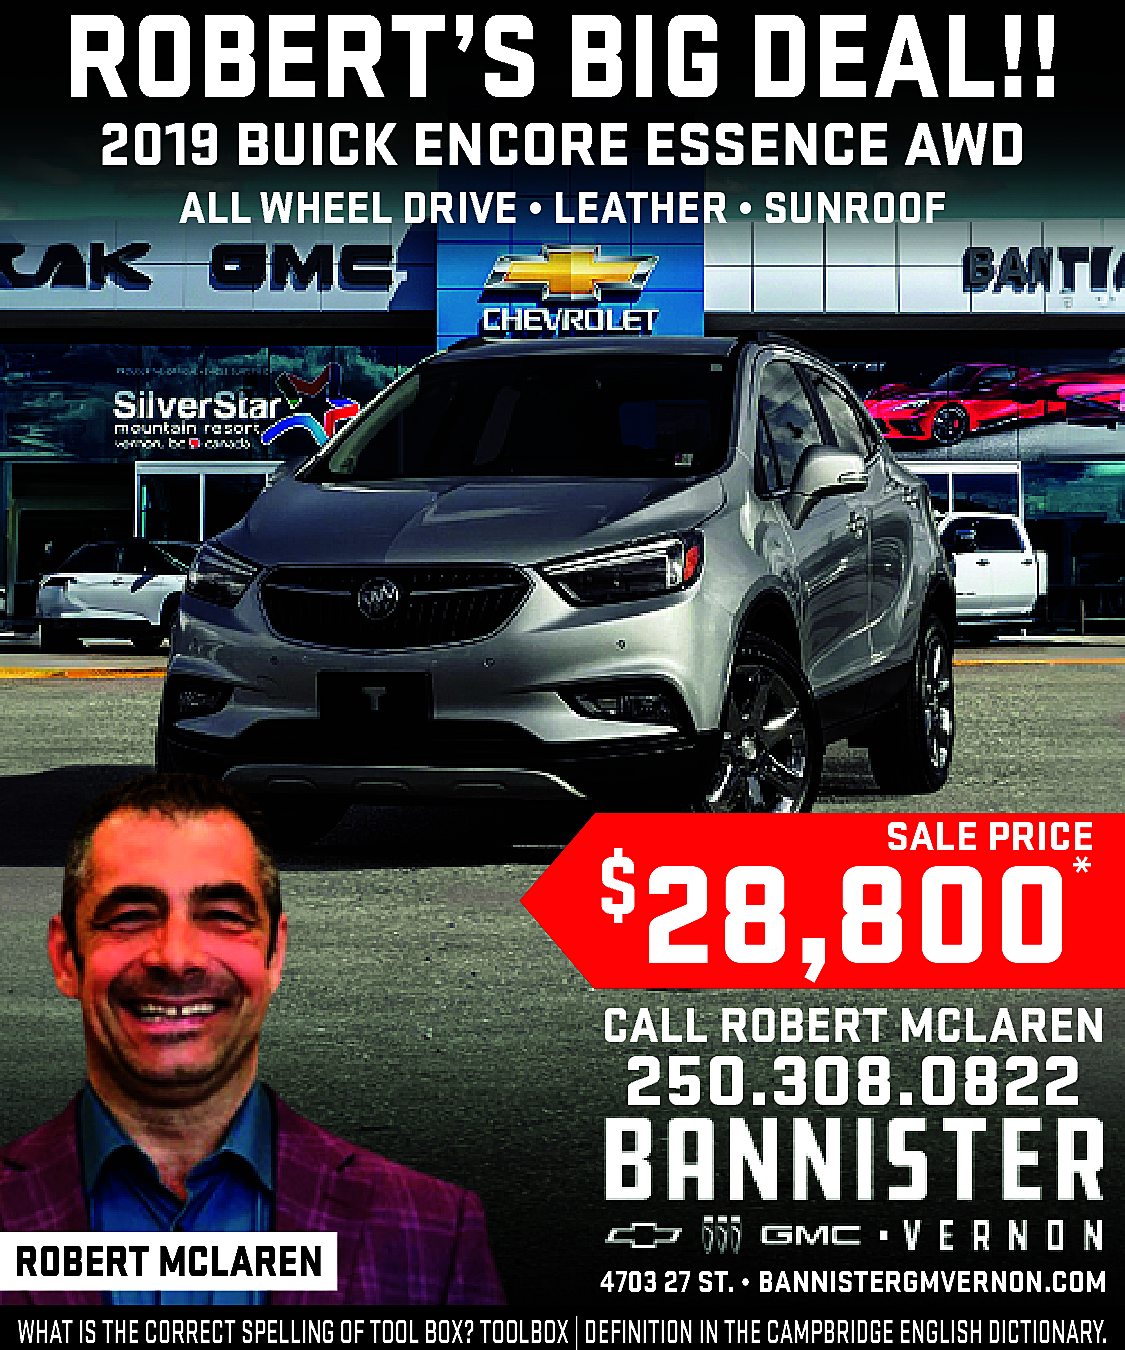 ROBERT’S BIG DEAL!! <br>2019 BUICK  ROBERT’S BIG DEAL!!  2019 BUICK ENCORE ESSENCE AWD  ALL WHEEL DRIVE • LEATHER • SUNROOF    SALE PRICE    28,800    $    *    CALL ROBERT MCLAREN    250.308.0822    ROBERT MCLAREN    ·    4703 27 ST. • www.bannistergmvernon.com  BANNISTERGMVERNON.COM    WHAT IS THE CORRECT SPELLING OF TOOL BOX? TOOLBOX | DEFINITION IN THE CAMPBRIDGE ENGLISH DICTIONARY.    